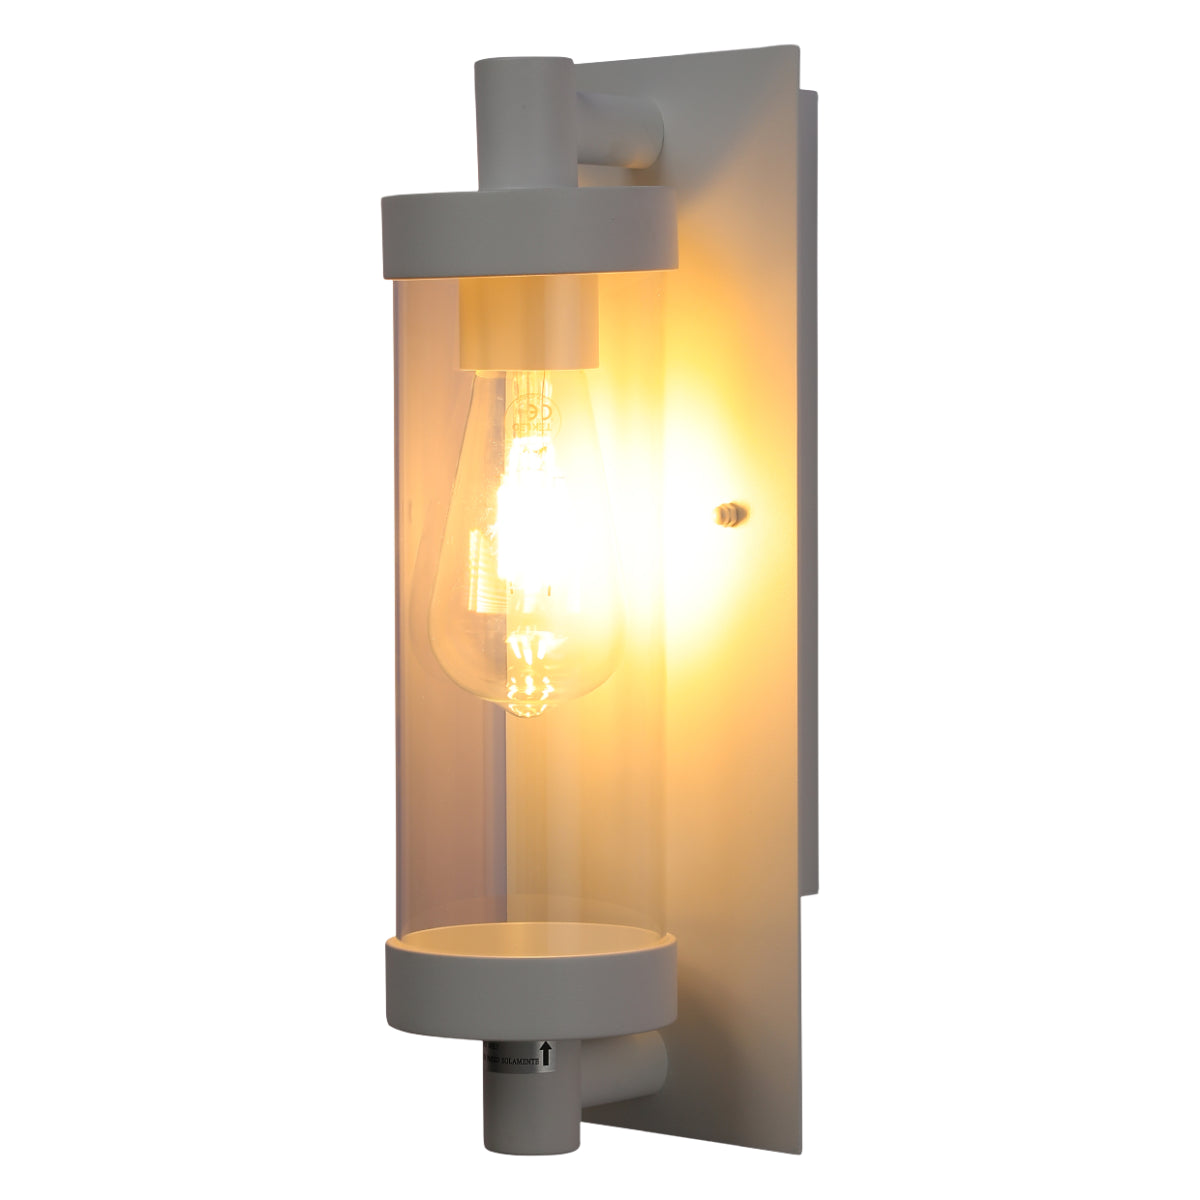 Main image of Timeless Elegance Wall Sconce - Durable Glass & Aluminum